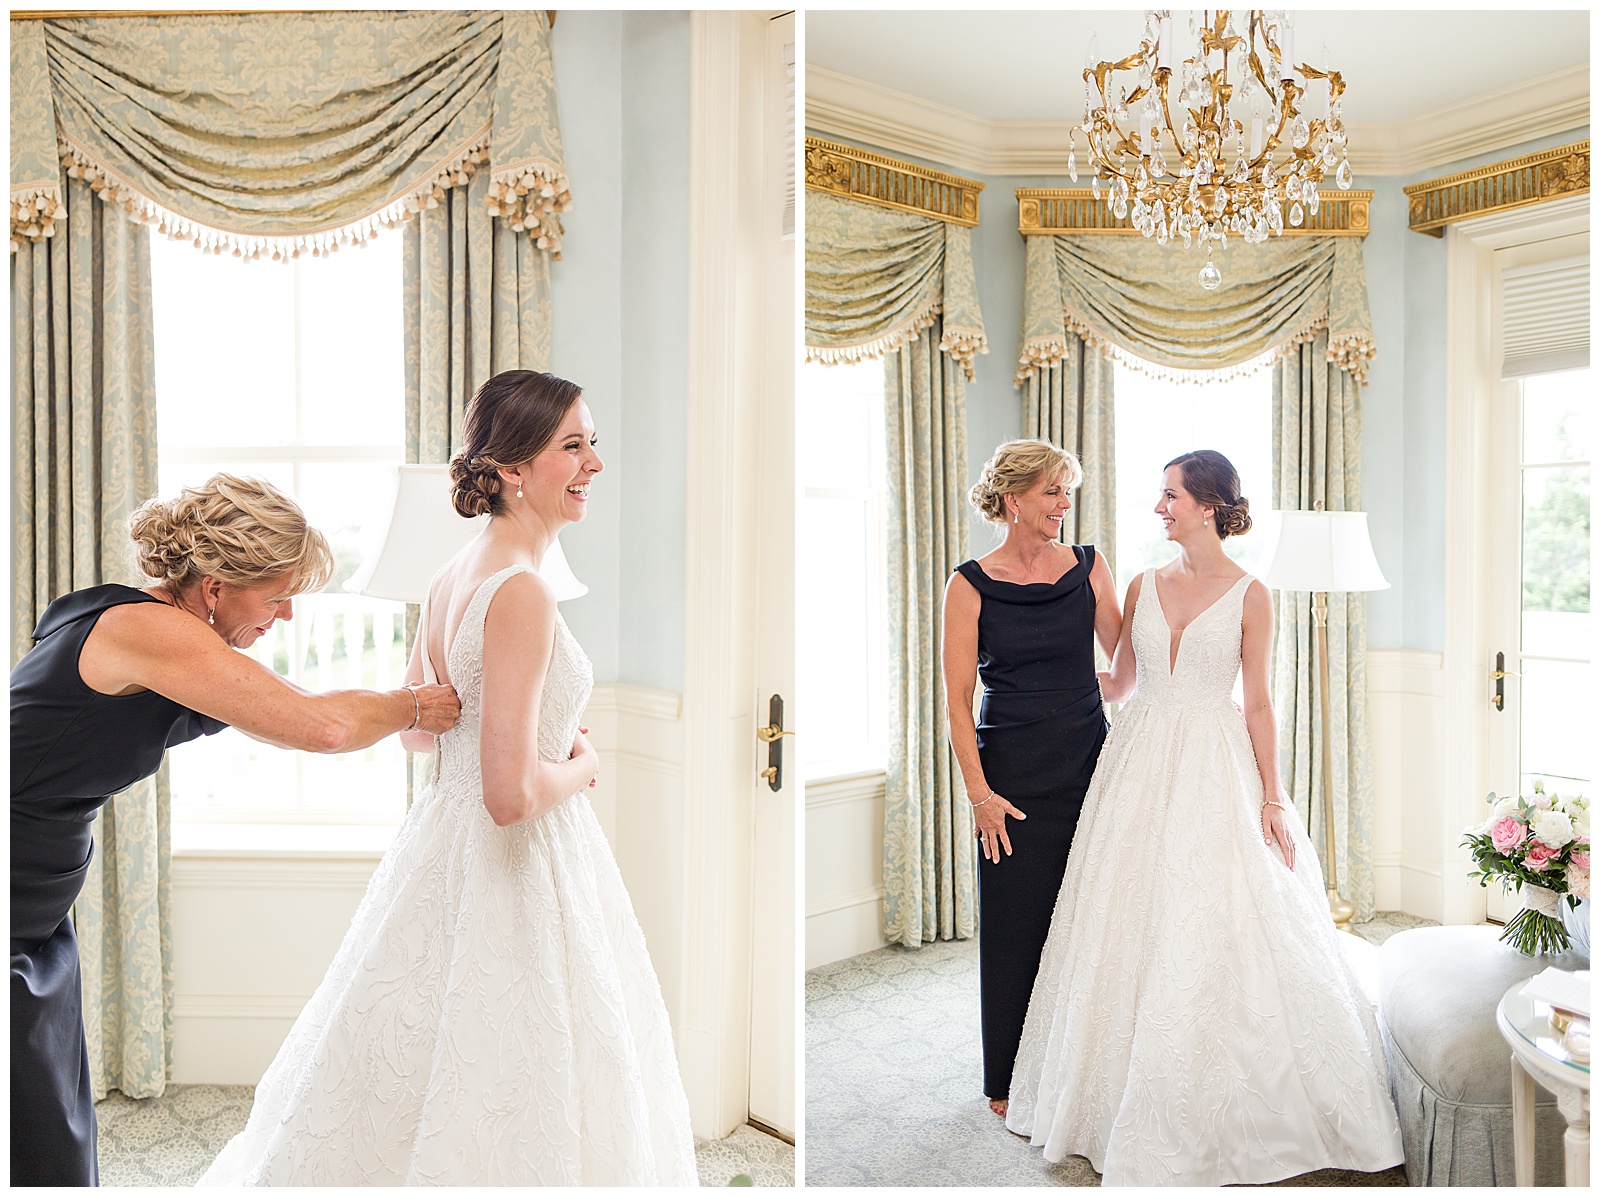 Bridal portraits in the bridal suite at the Chanler at Cliff Walk